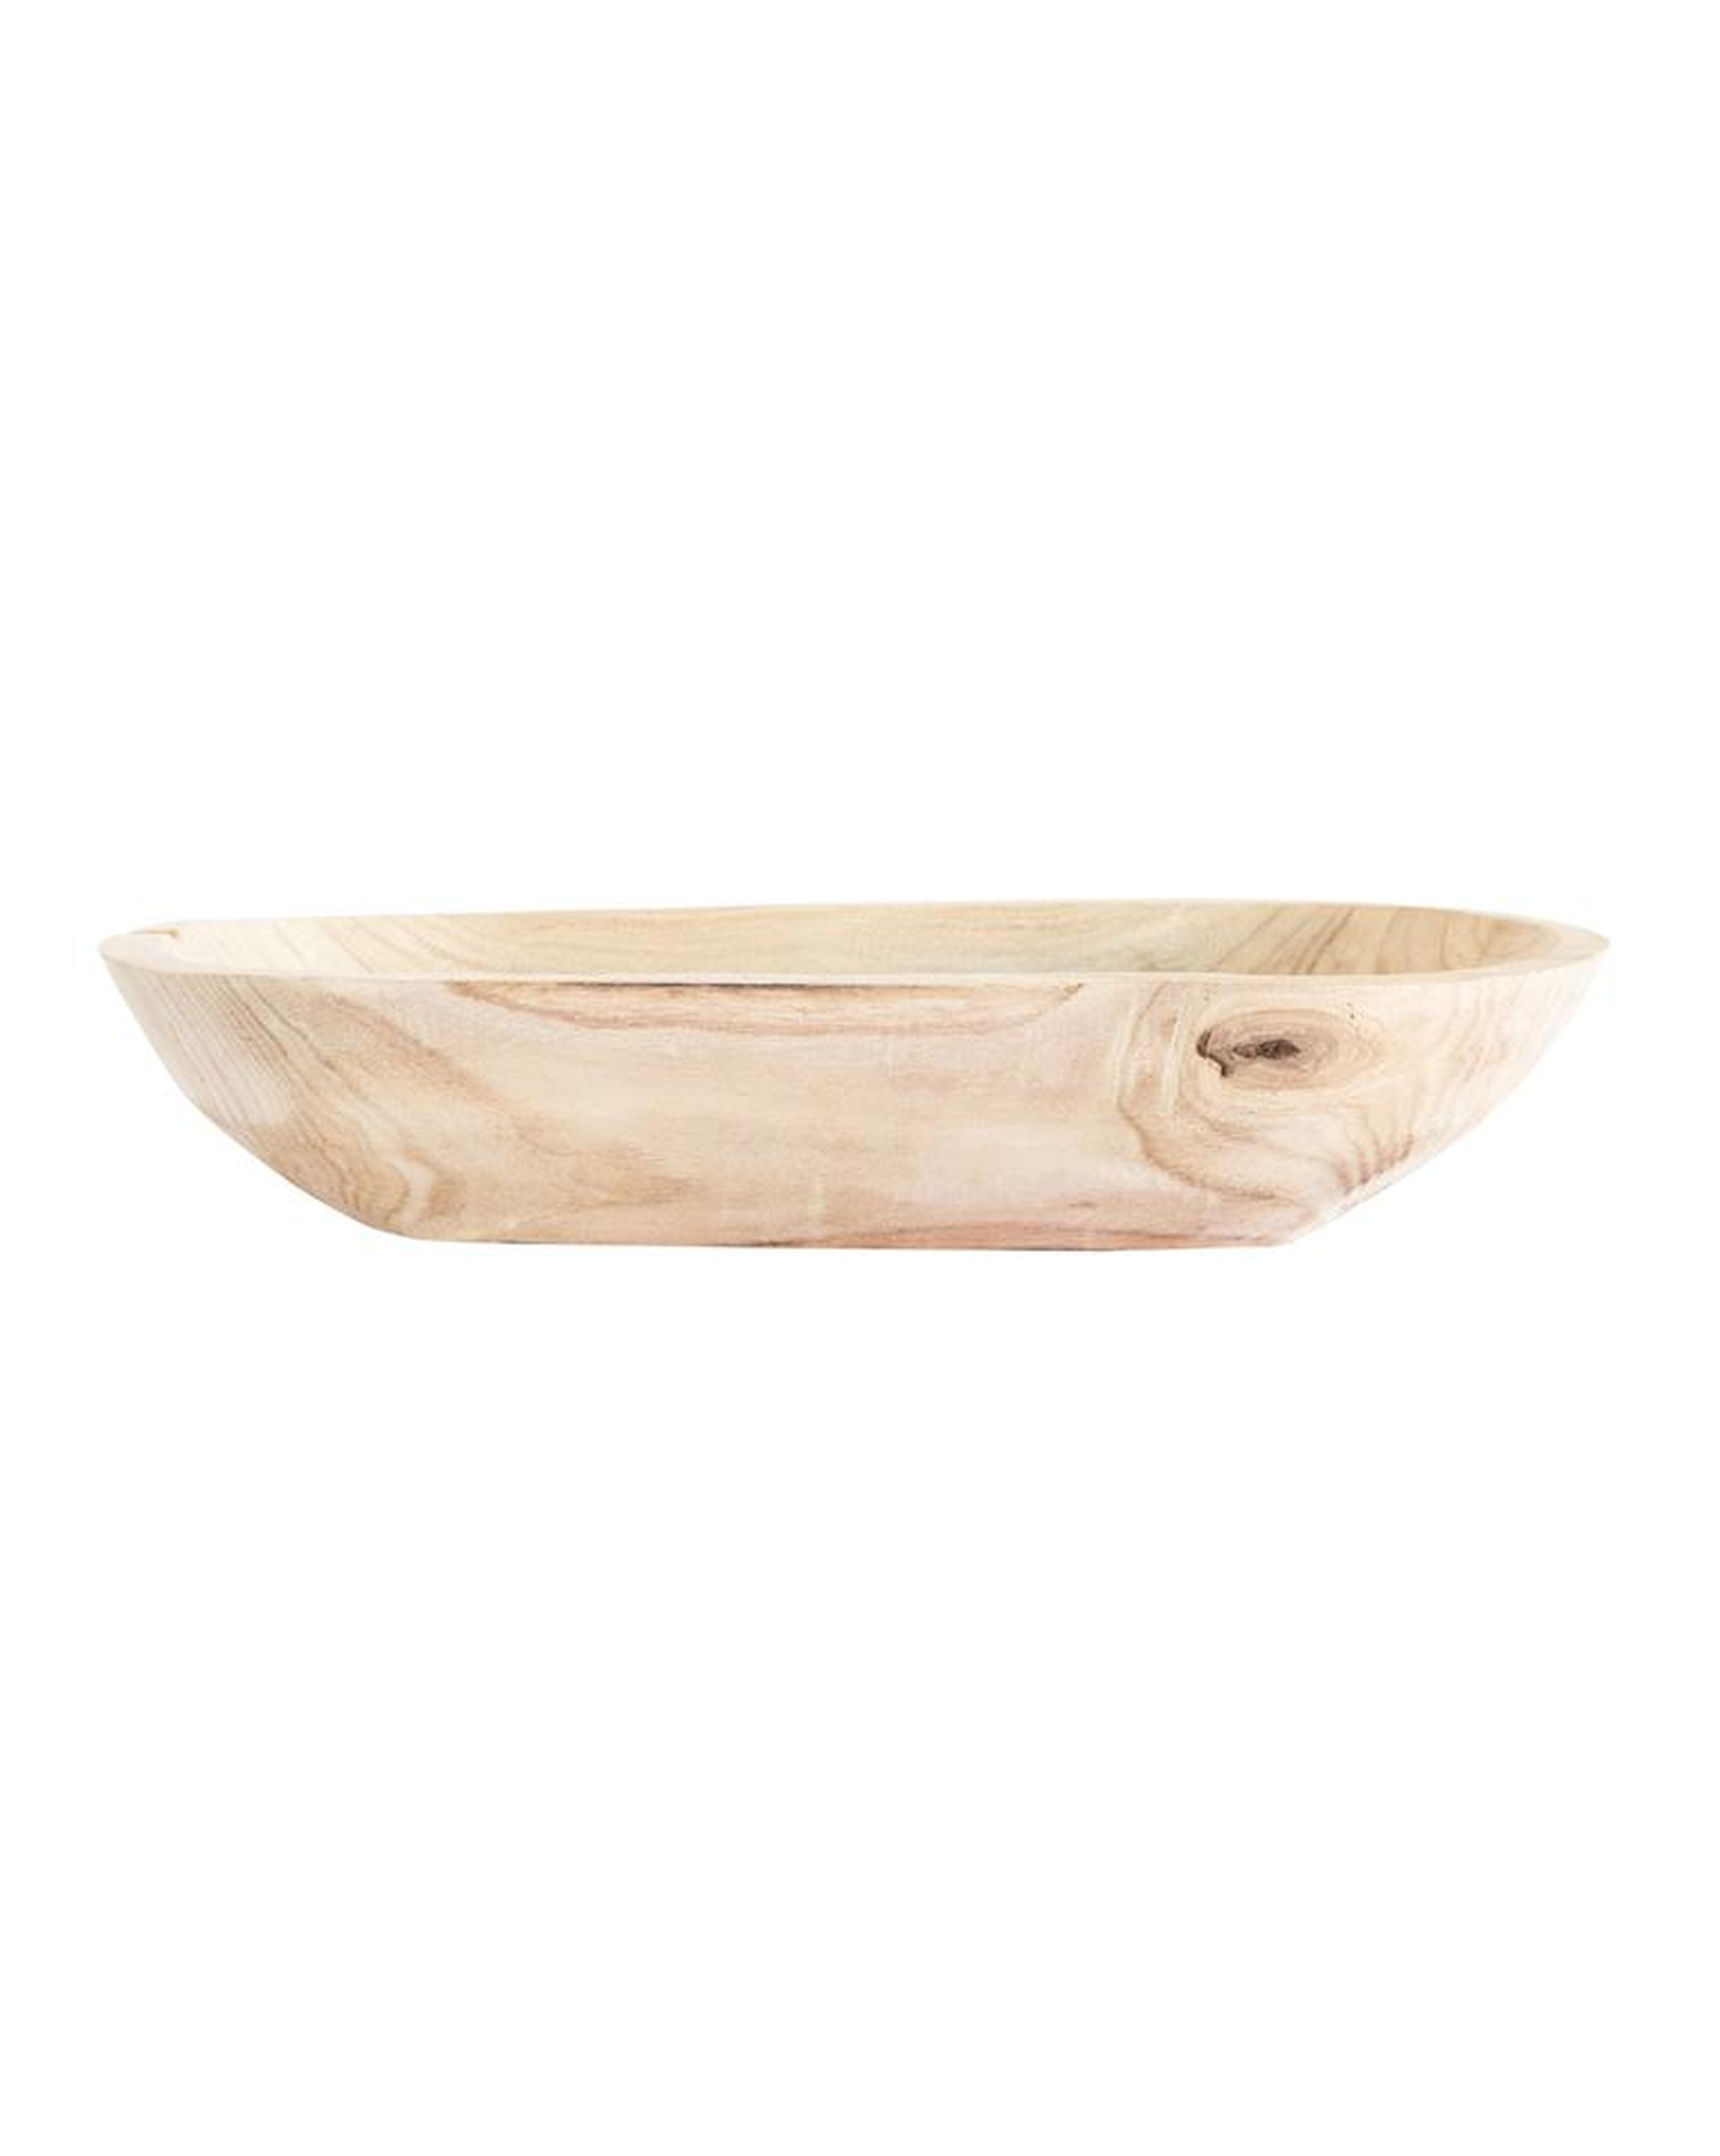 OBLONG BOWL - LARGE - McGee & Co.